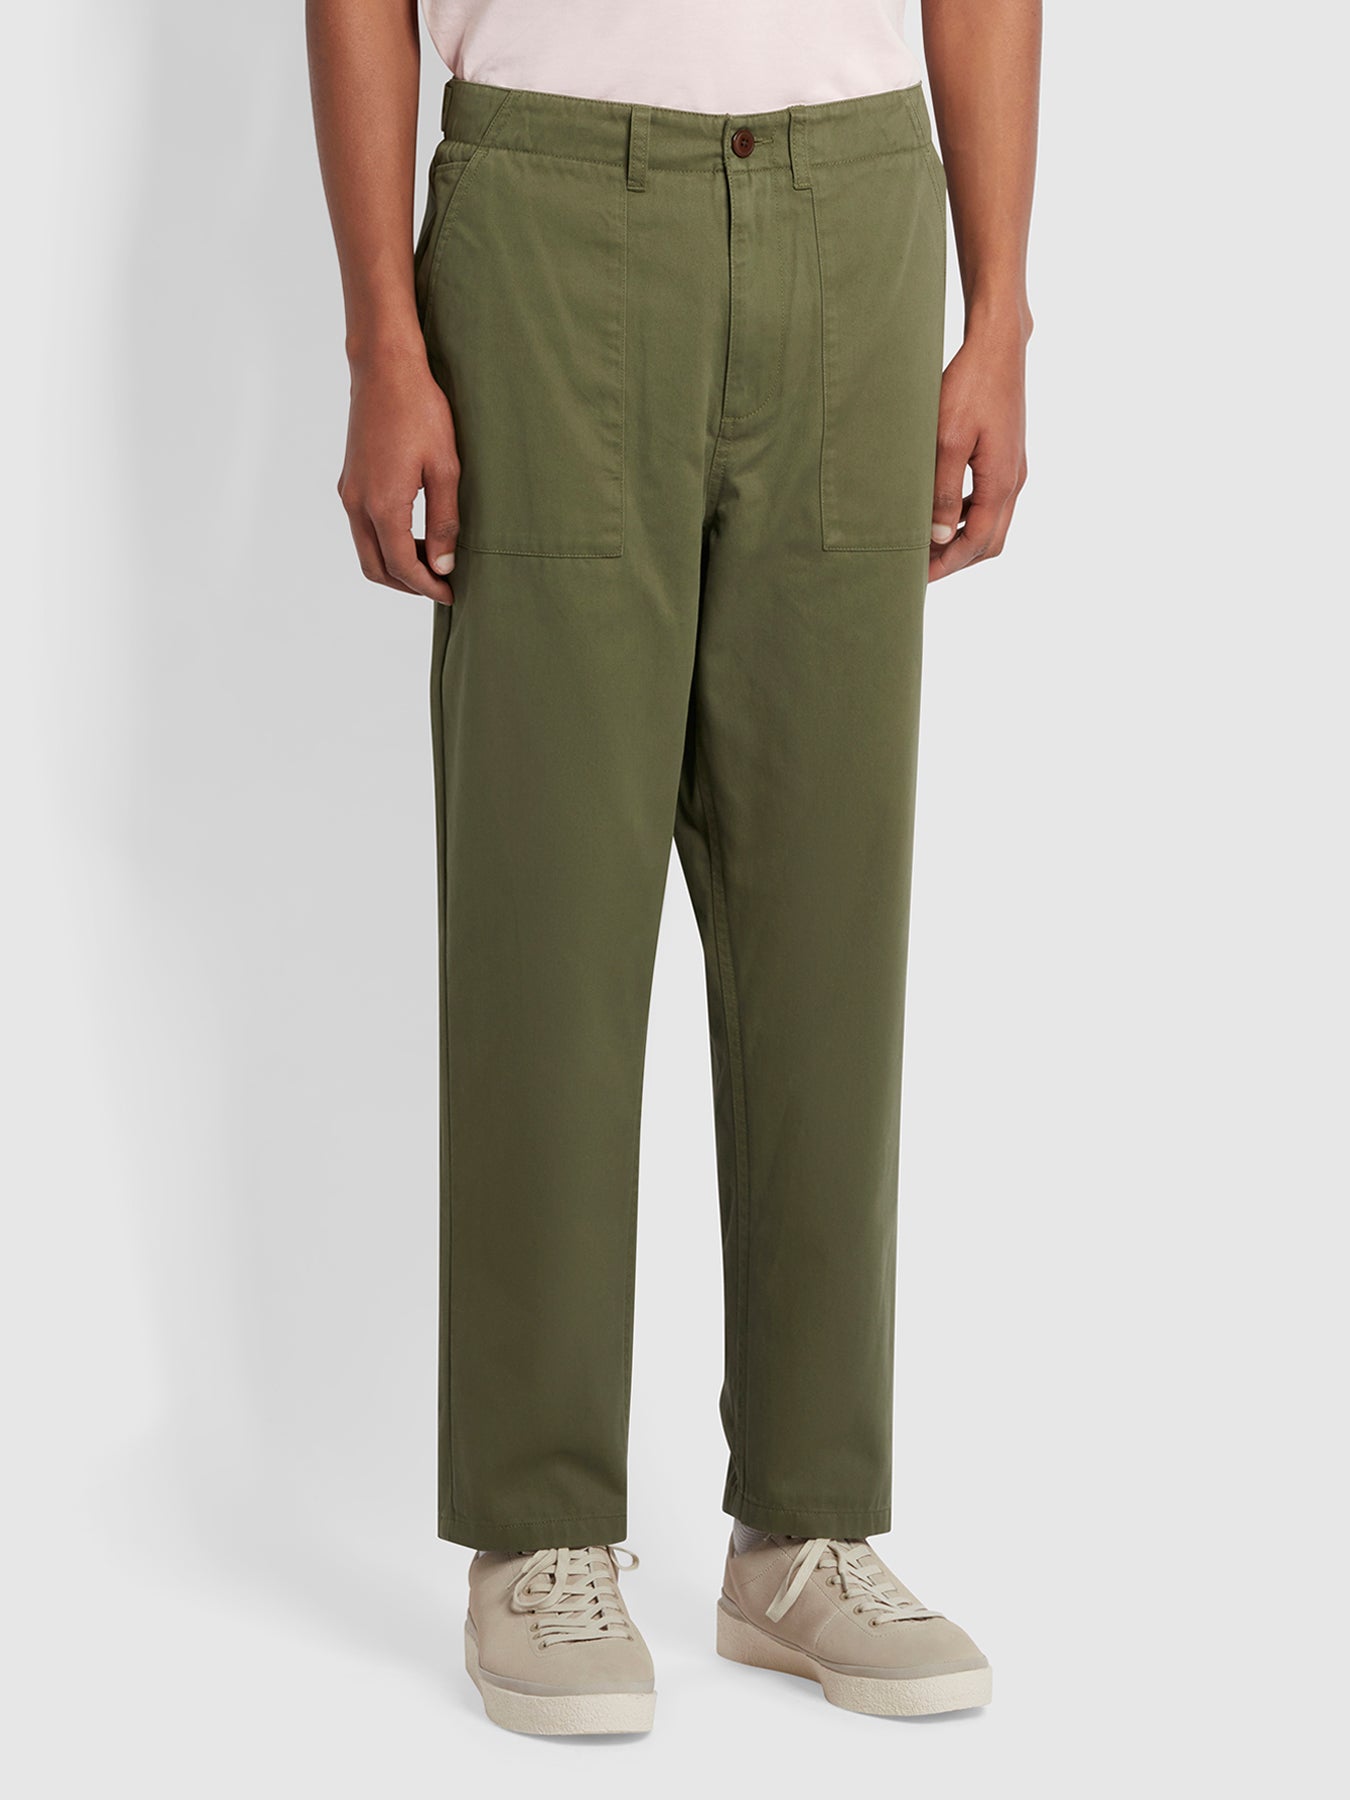 View Hawtin Relaxed Fit Twill Trousers In Vintage Green information